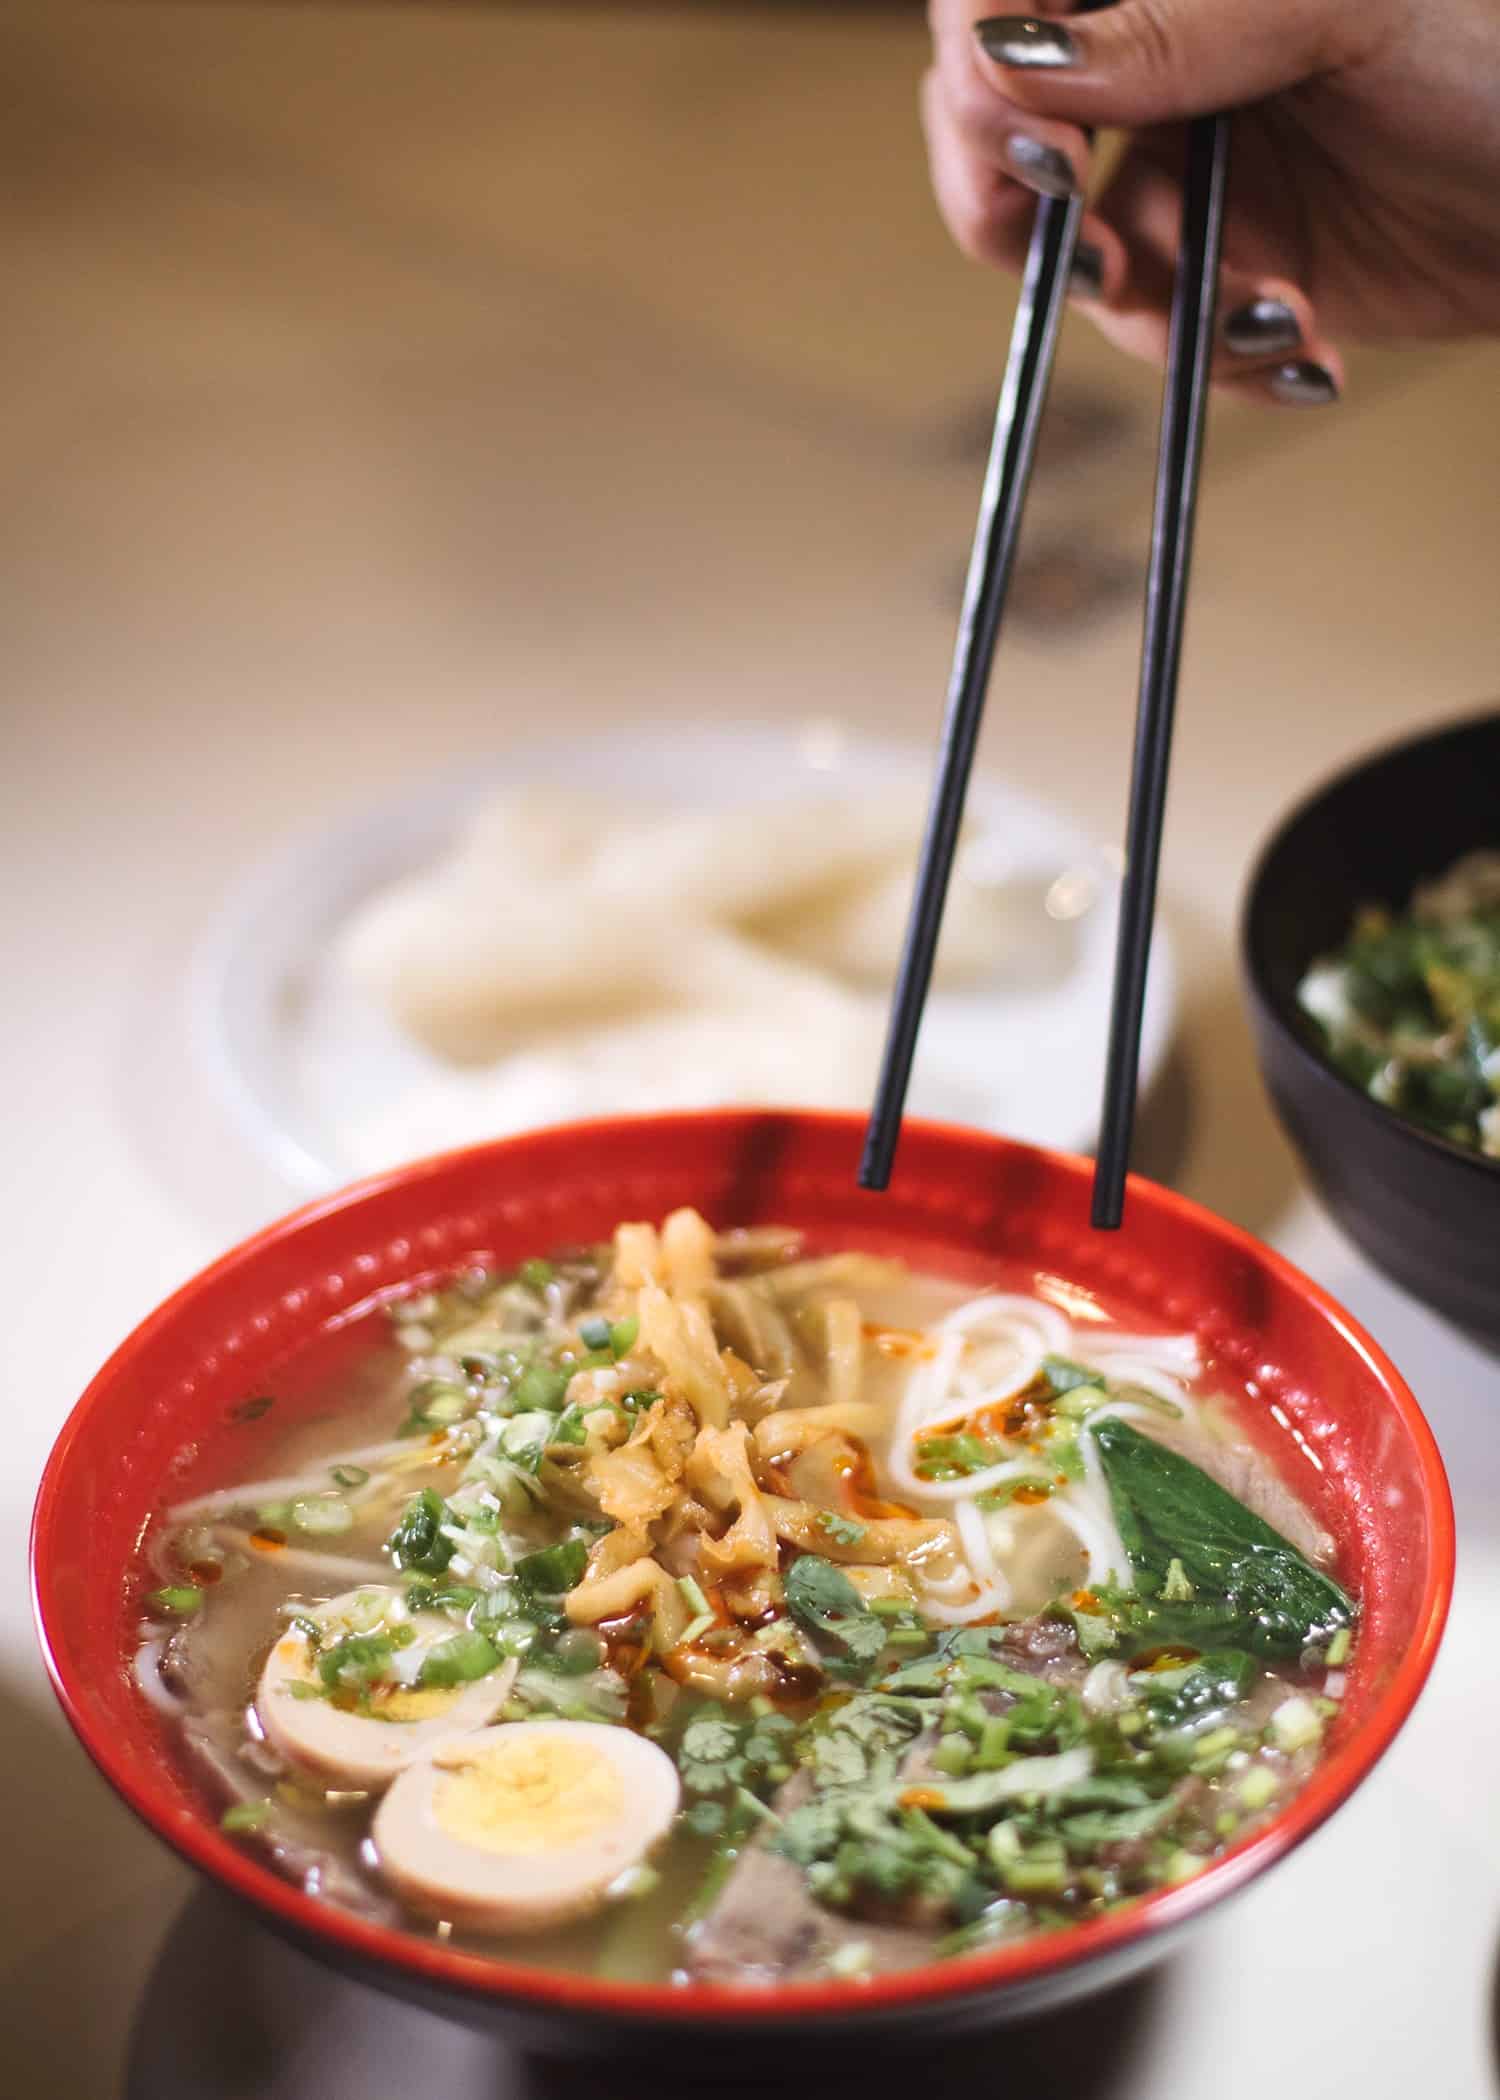 PanPan Noodle Bar | where to eat Wuhan Chinese noodles in Toronto | best Toronto restaurants to visit | top places to eat in Toronto, Ontario | Diary of a Toronto Girl, a Canadian lifestyle blog